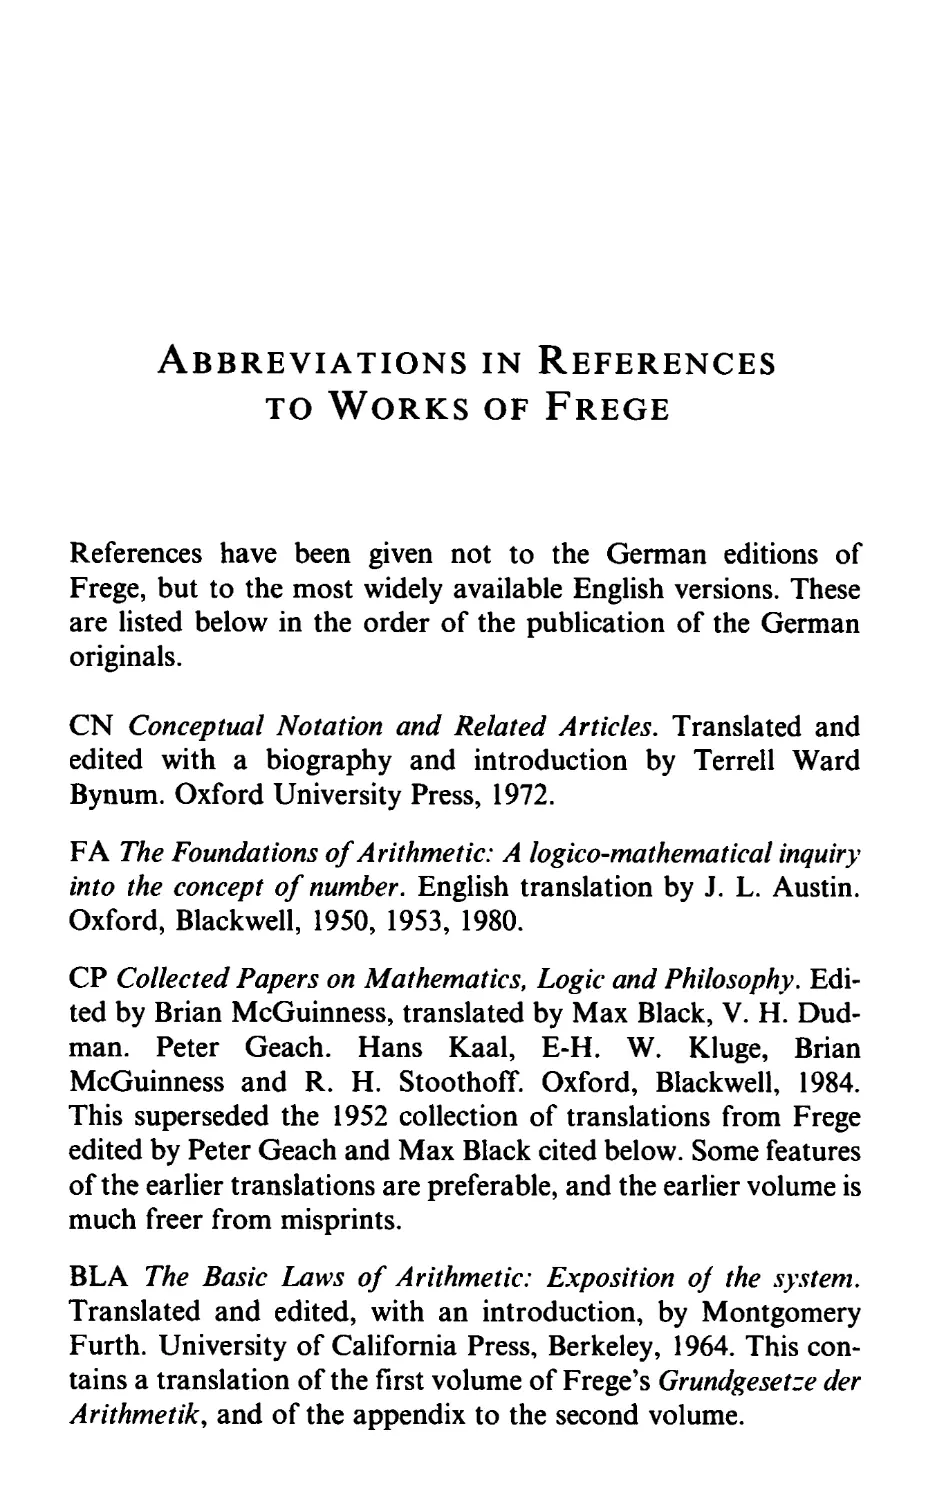 Abbreviations in references to works of Frege